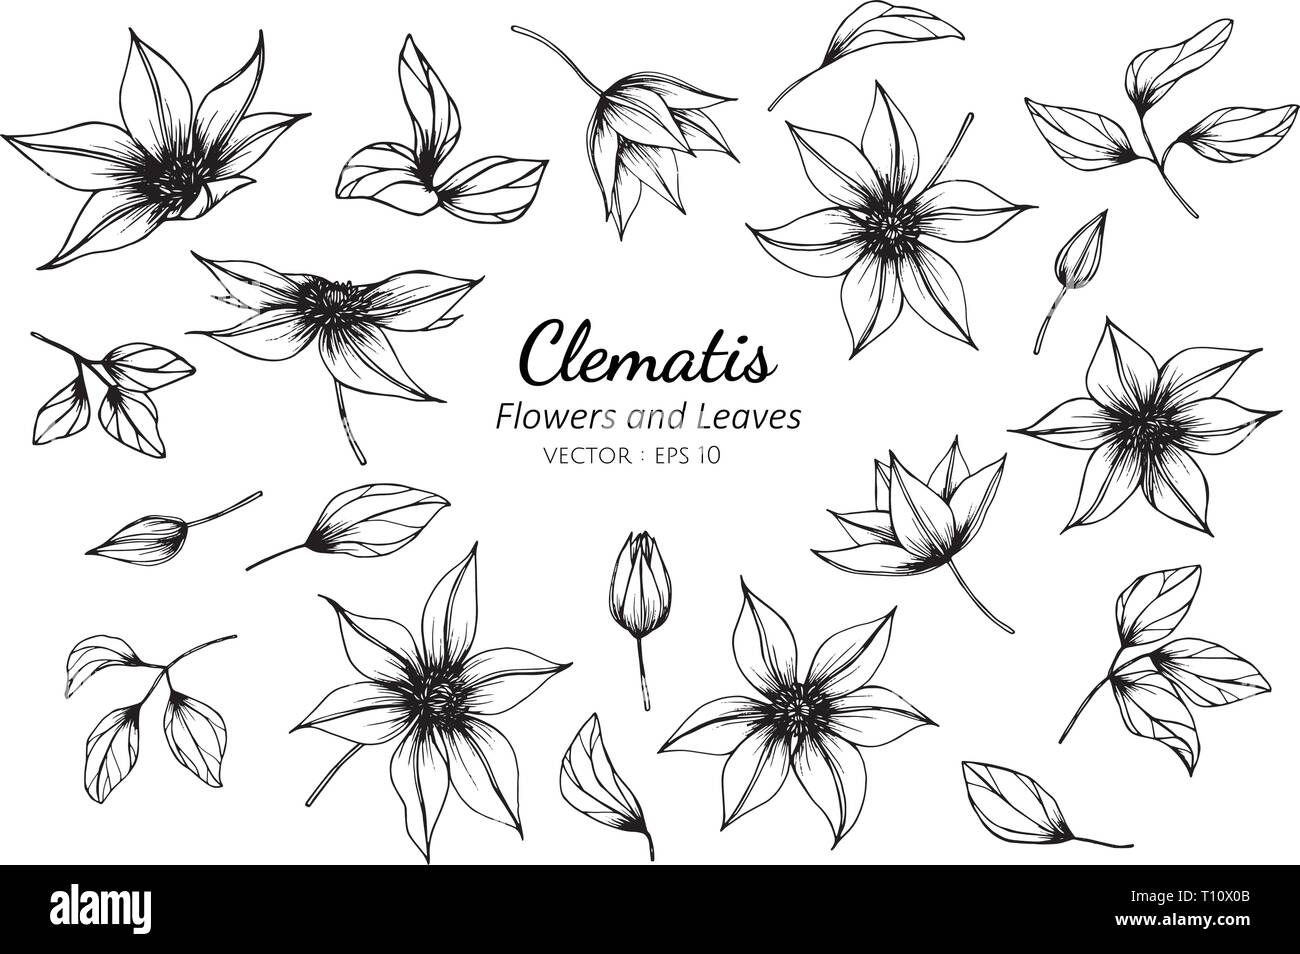 Collection set of clematis flower and leaves drawing illustration. for pattern, logo, template, banner, posters, invitation and greeting card design. Stock Vector